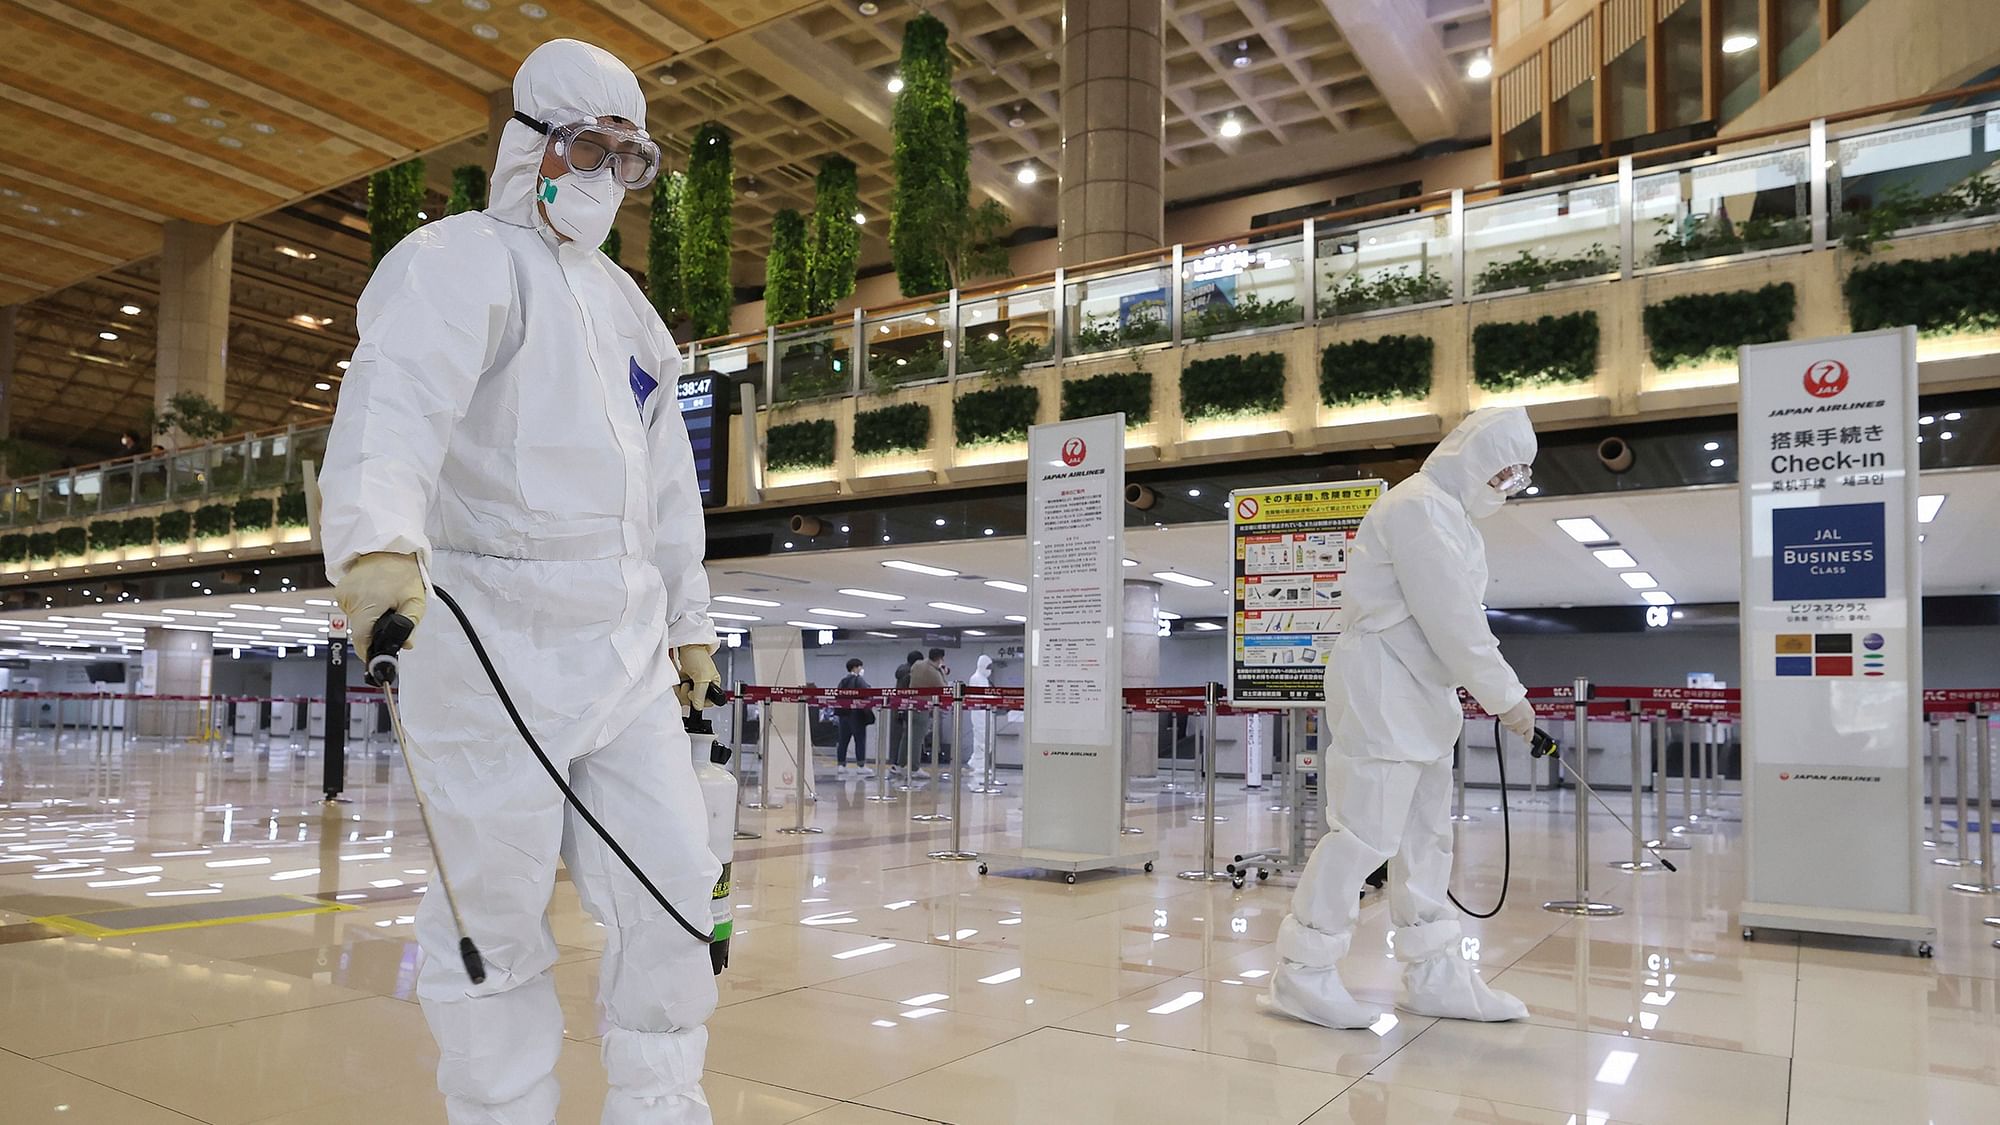 Workers spray disinfectant as a precaution against the novel coronavirus at Gimpo Airport in Seoul, South Korea.